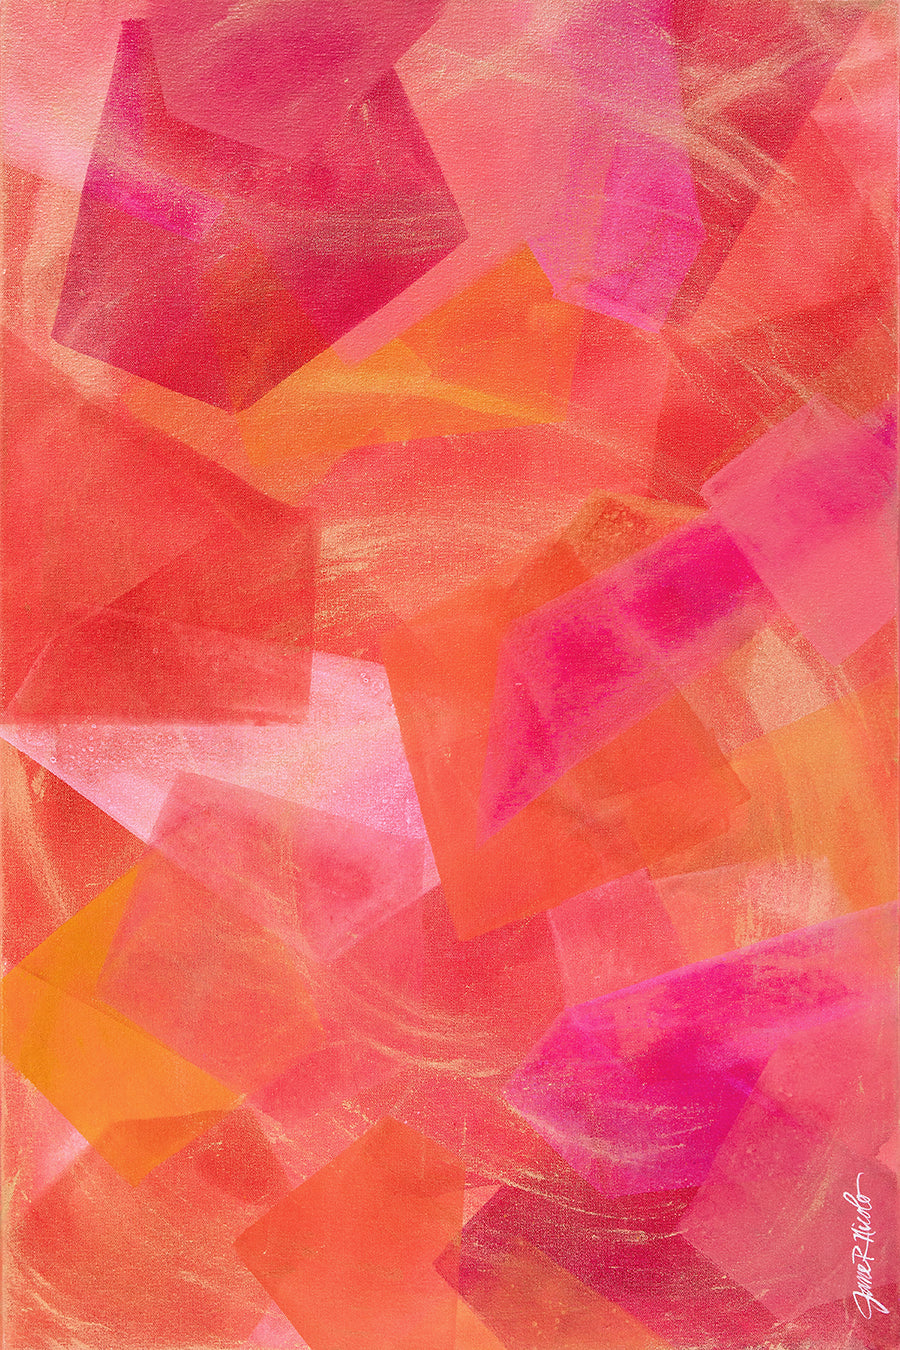 Passion 2, an acrylic painting on canvas, concept-based art, in magenta, orange, yellow, and metallic gold  Edit alt text